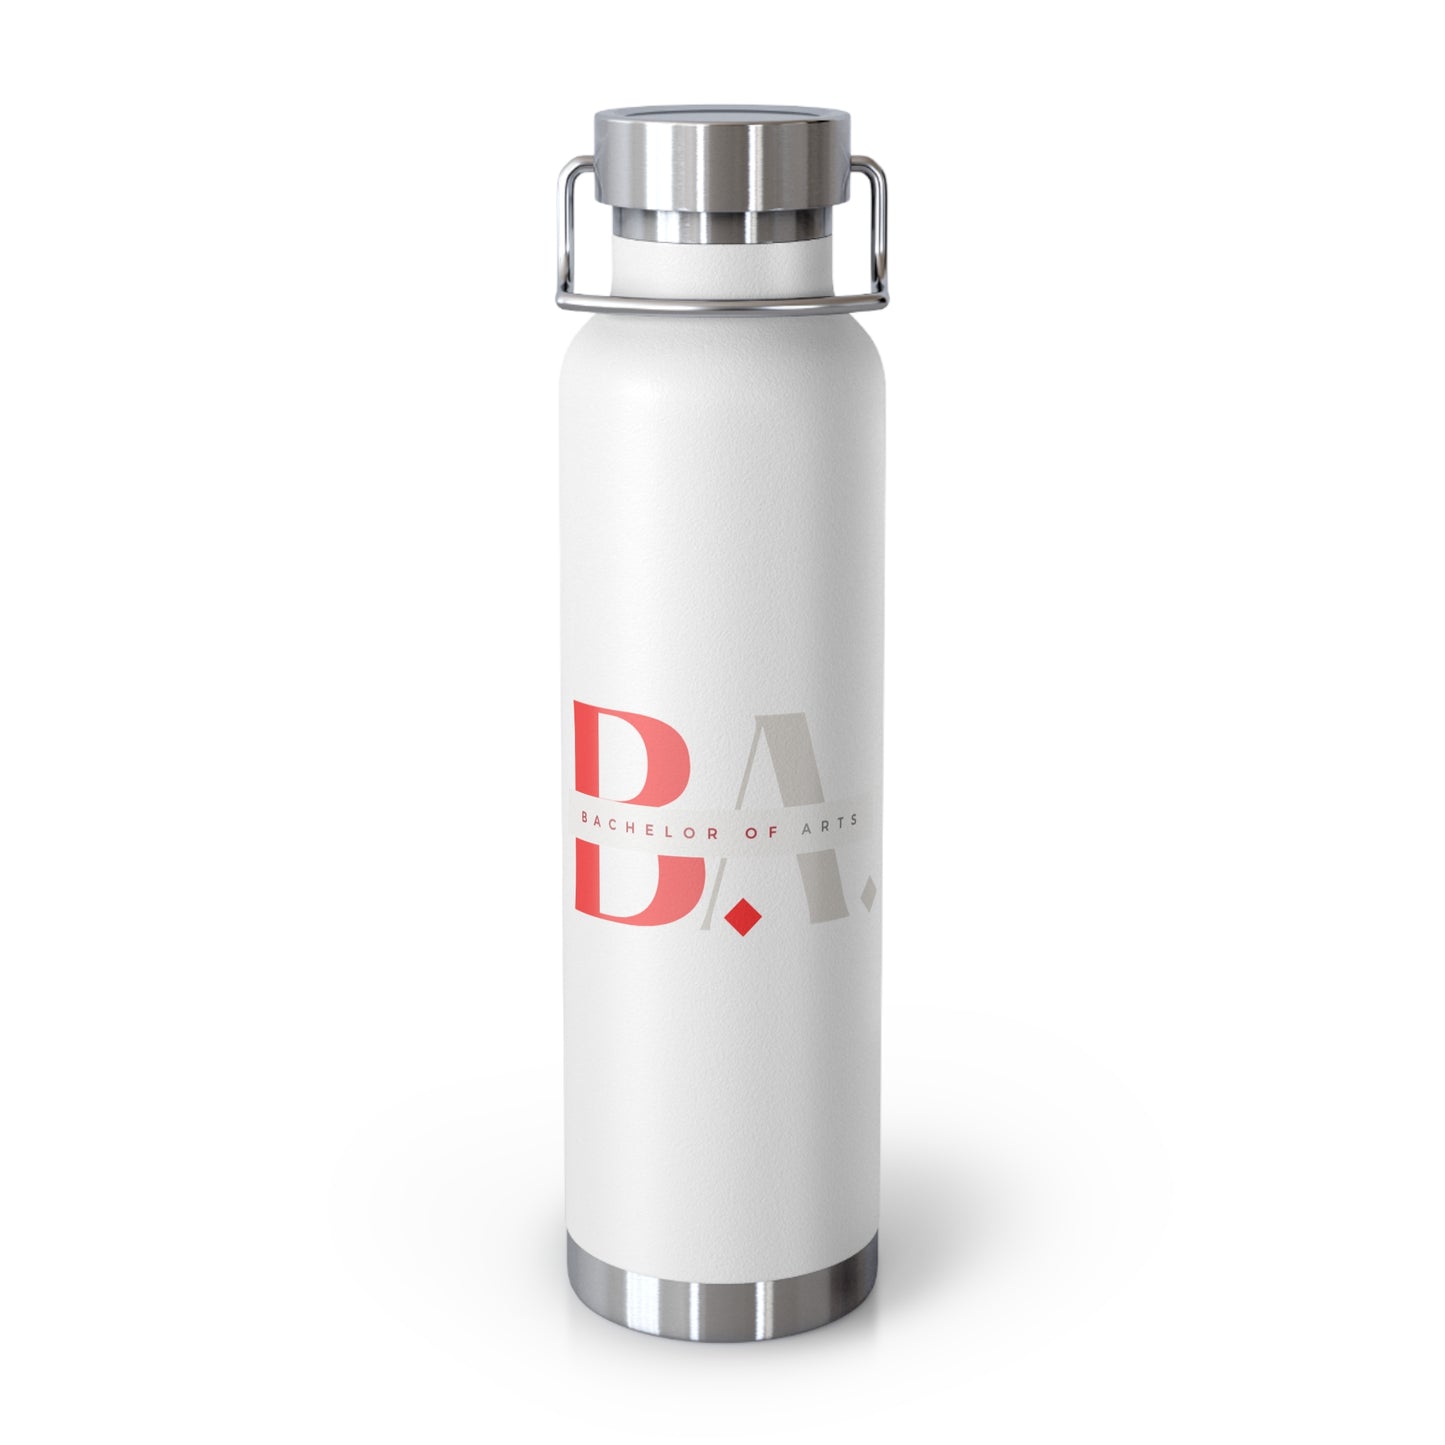 B.A. - Water tumbler with bachelor of arts credentials